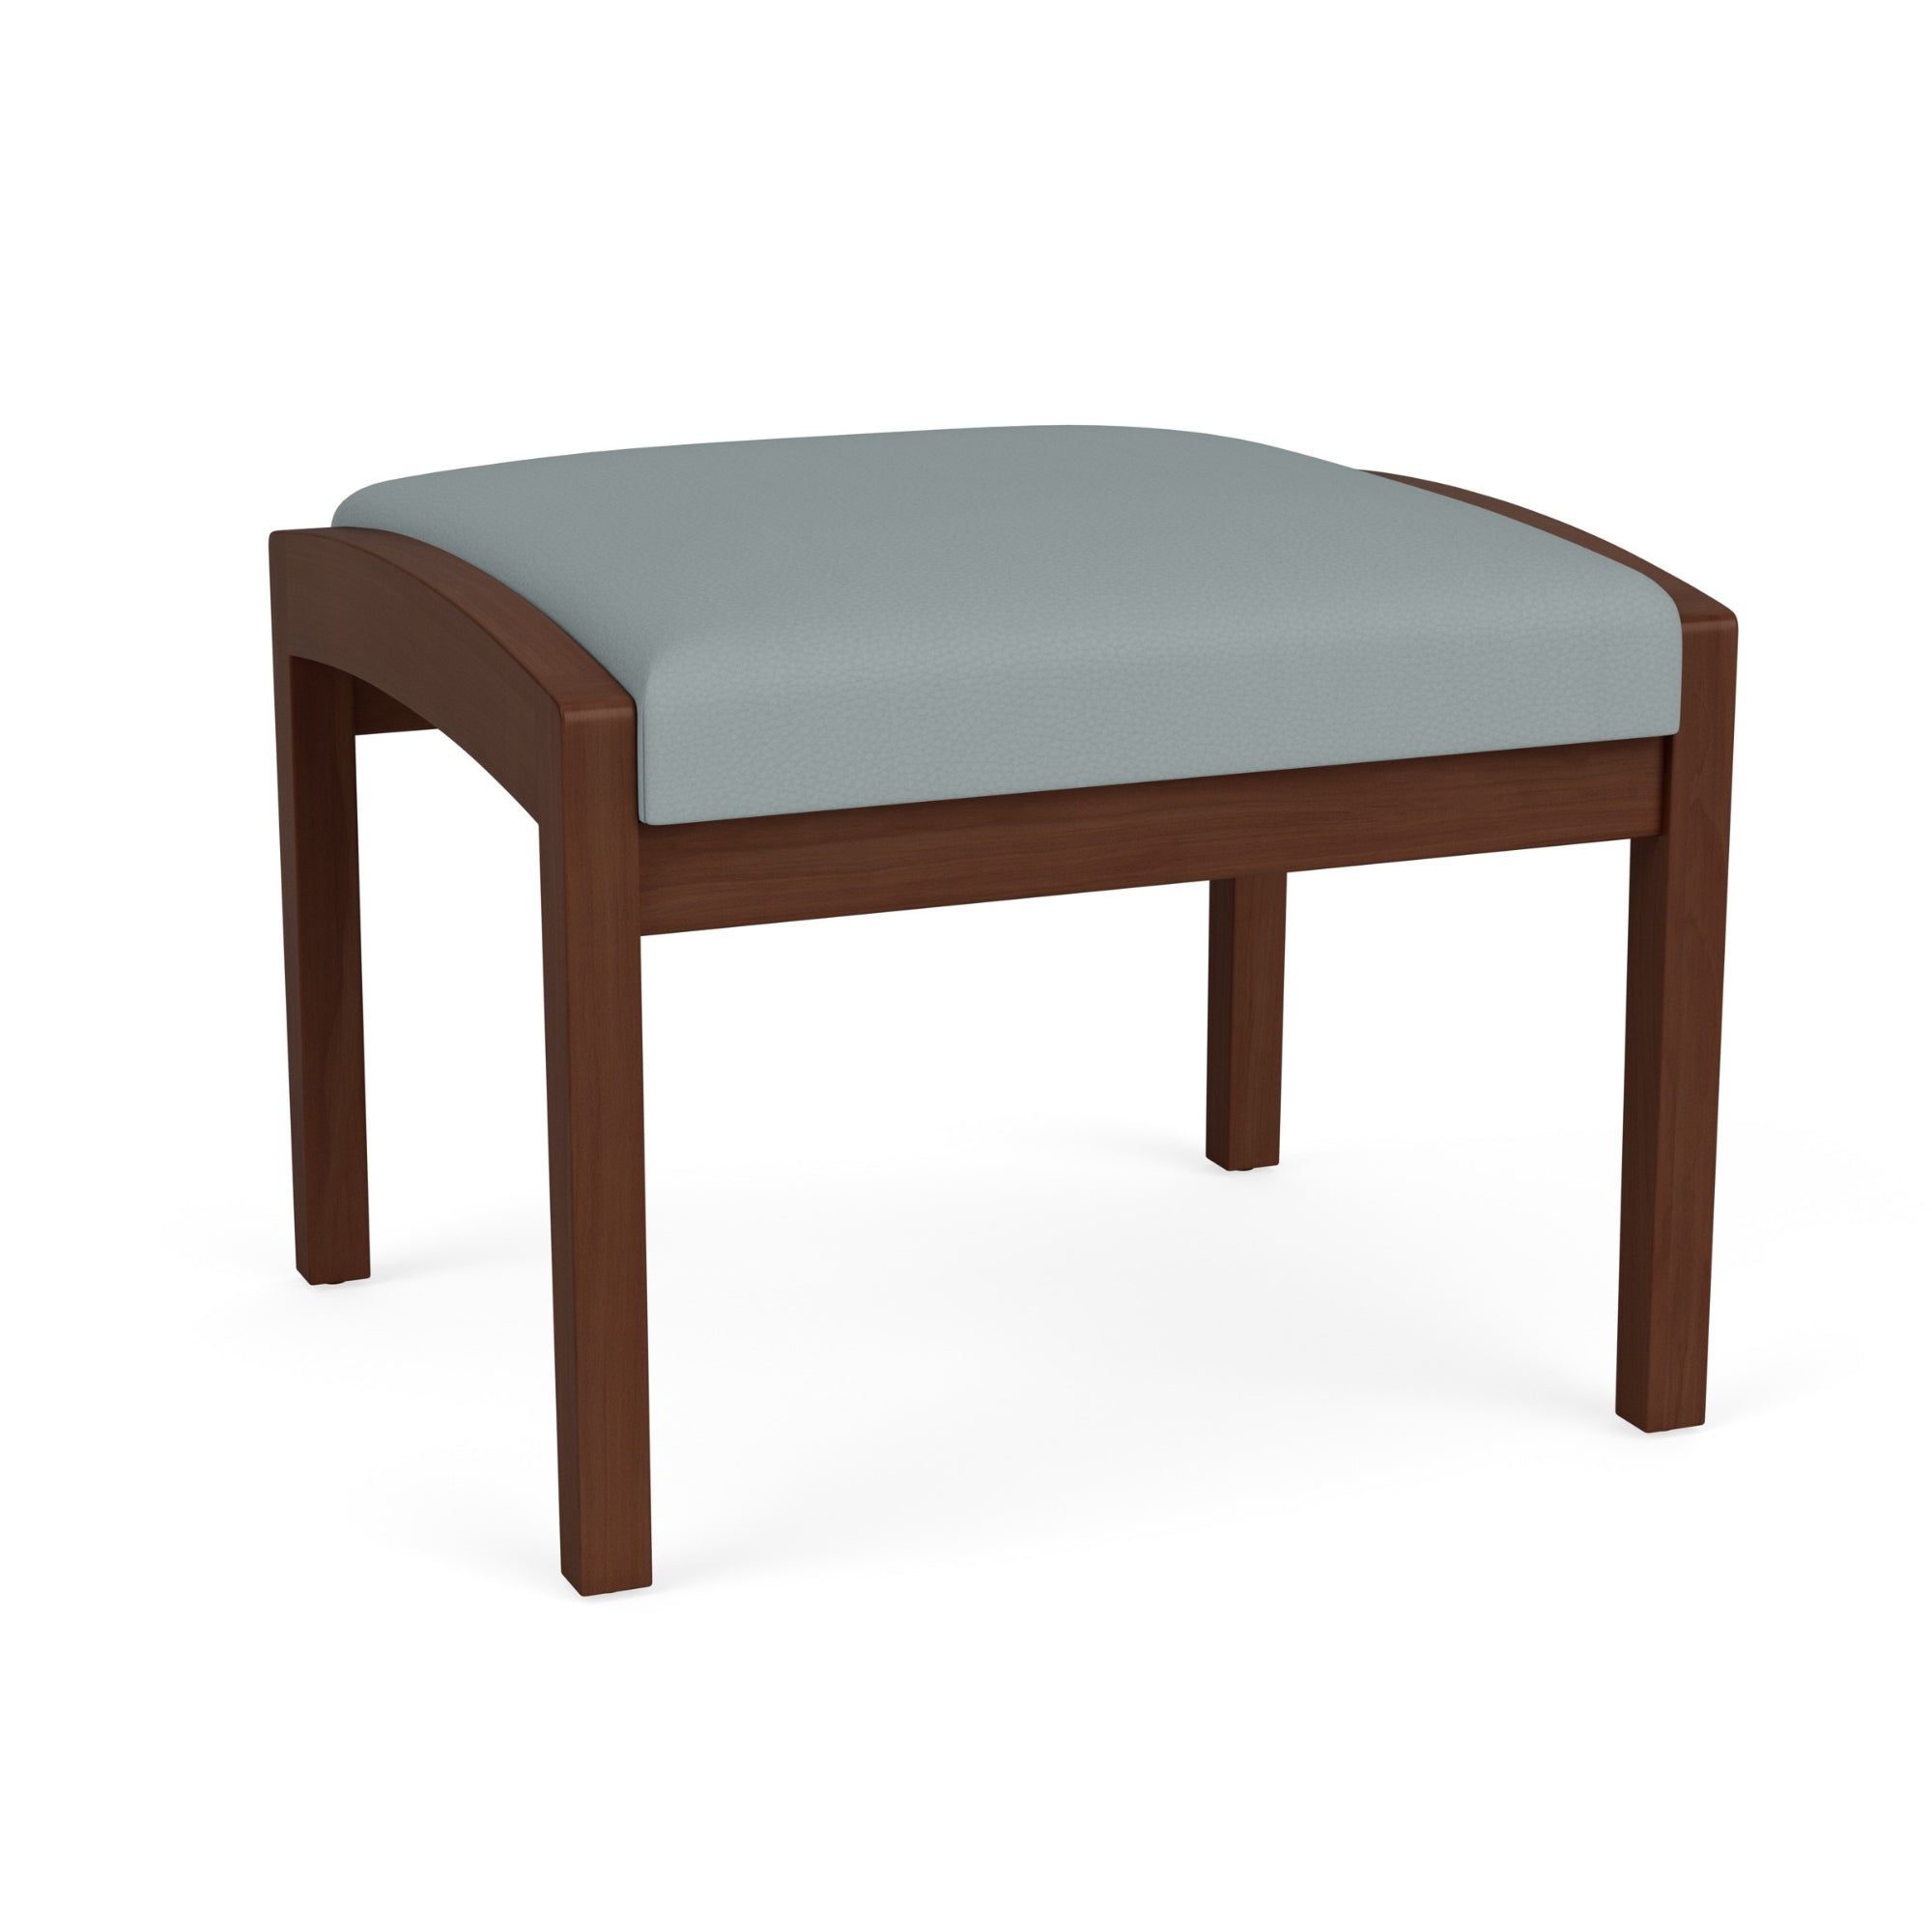 Lenox Wood Collection Reception Seating, 1 Seat Bench, Standard Vinyl Upholstery, FREE SHIPPING